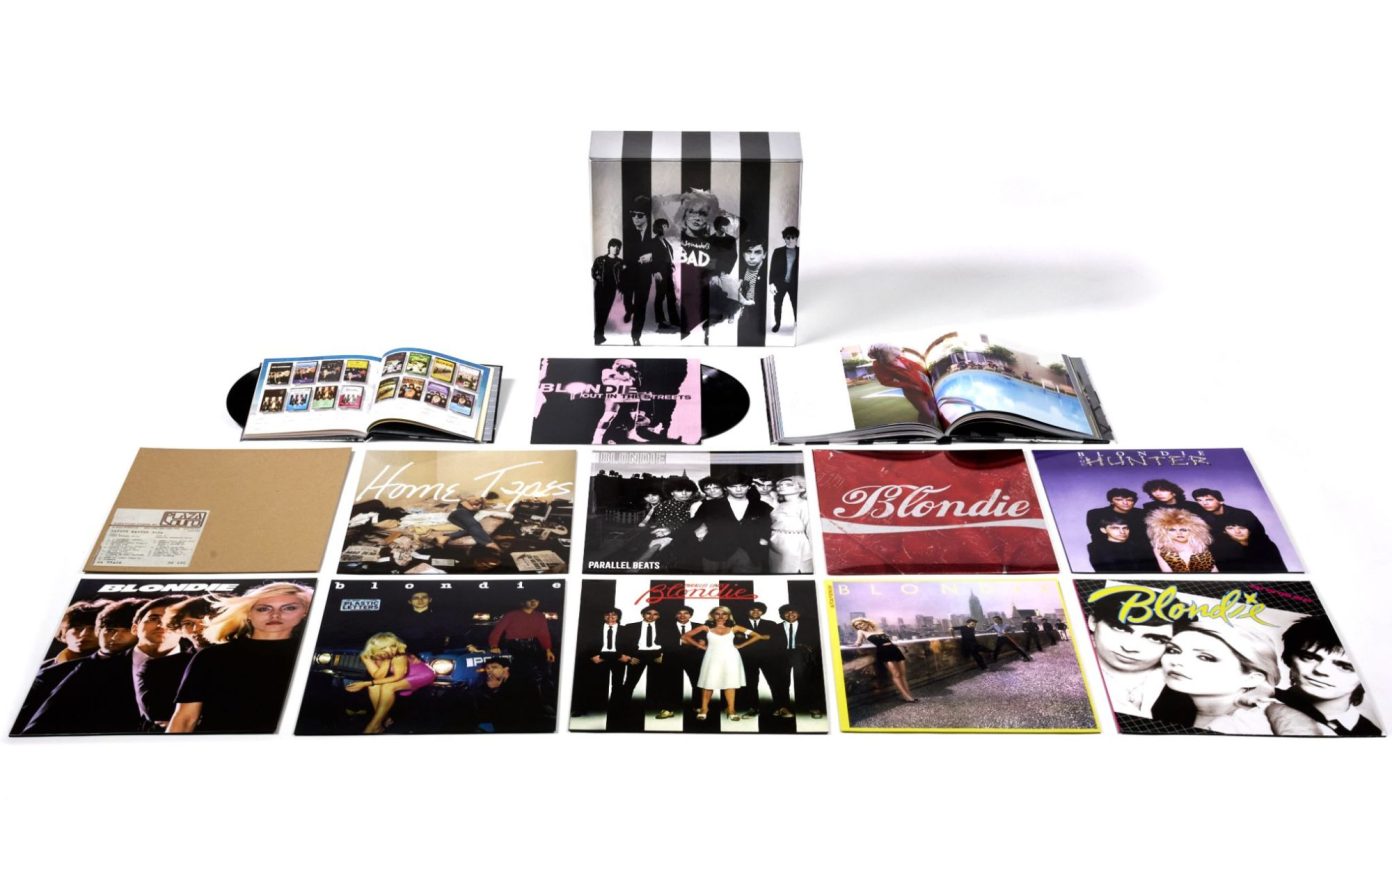 Blondie_Archival_project_Super_deluxe